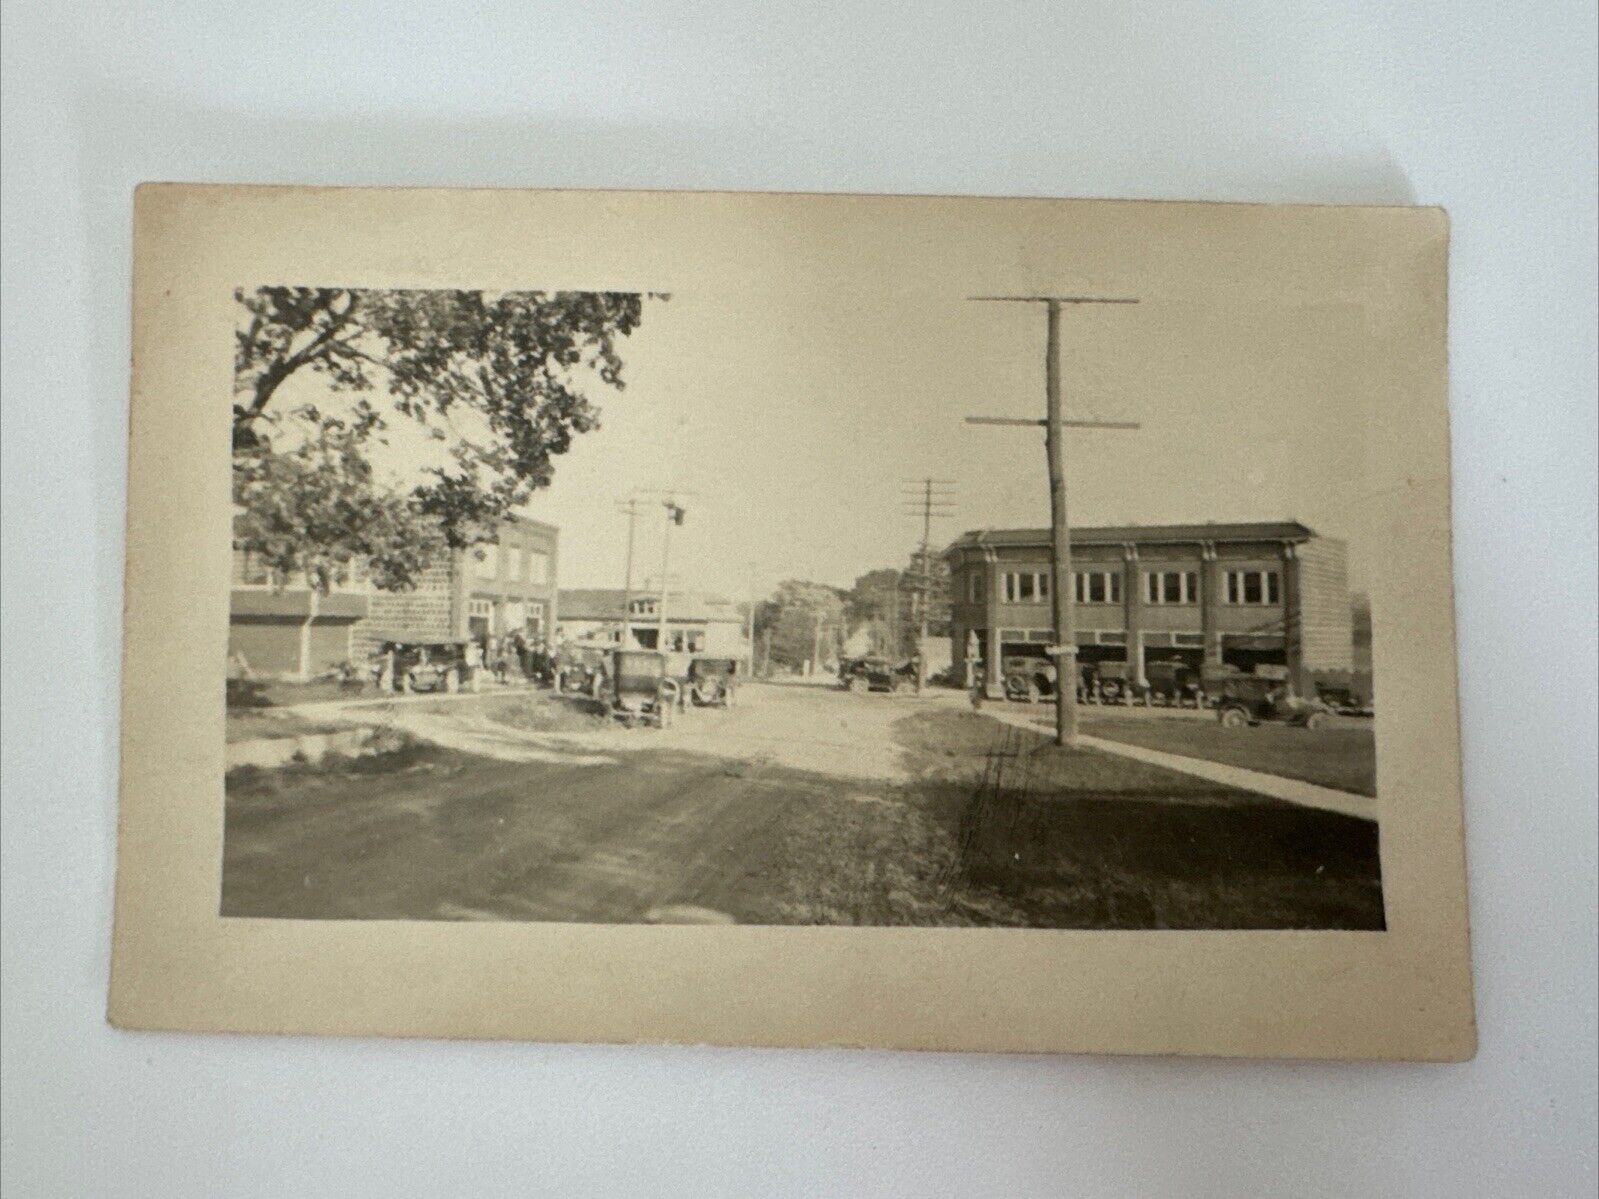 RPPC Street Scene Town Automobiles Stores Cars New York State - Real Photo